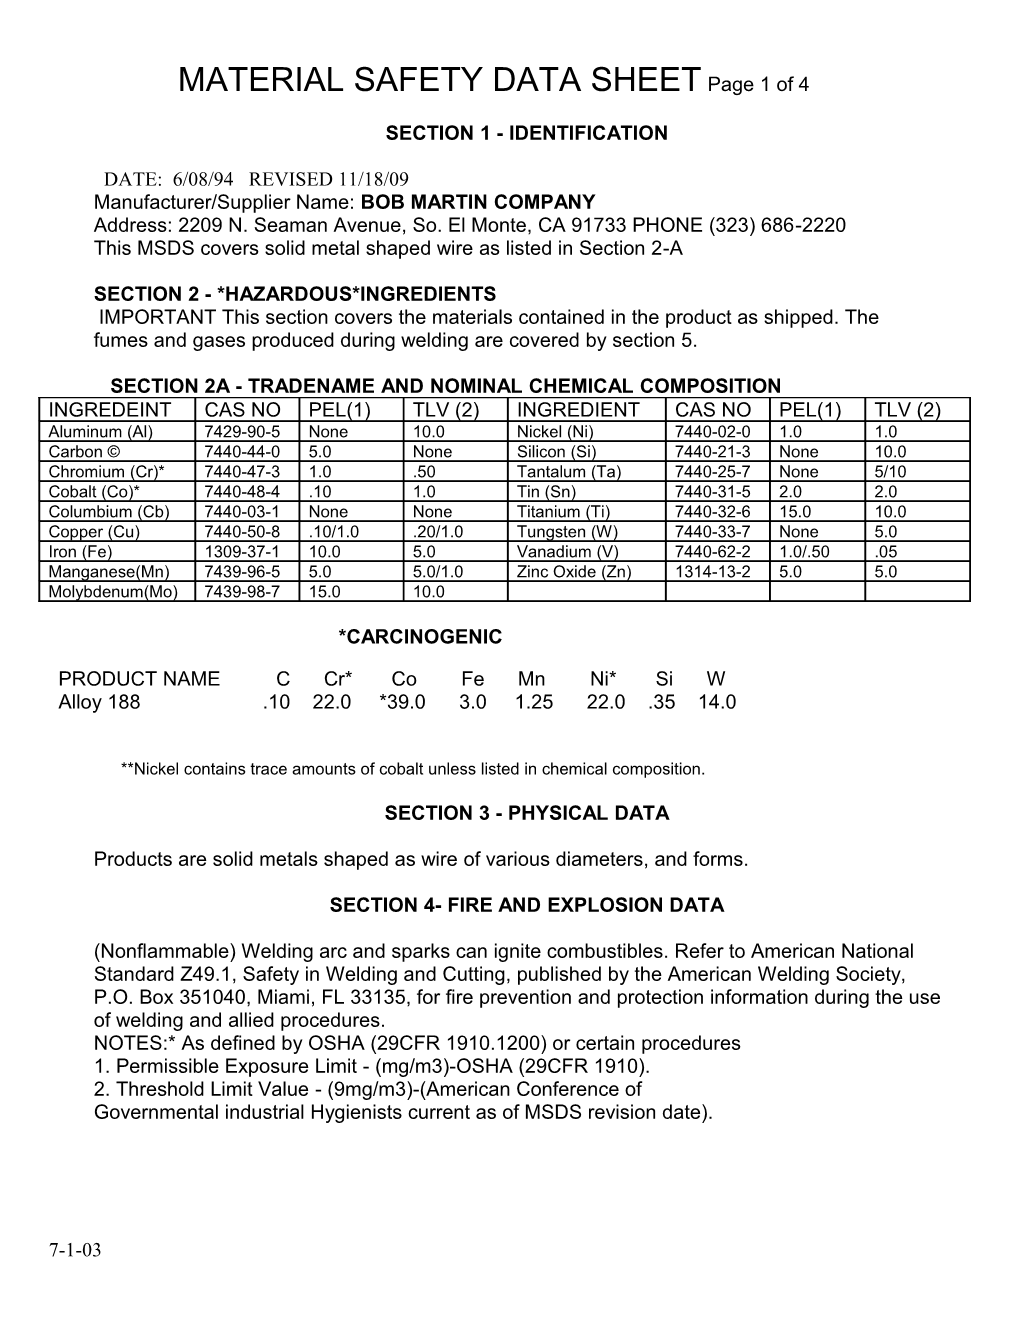 MATERIAL SAFETY DATA SHEET Page 1 of 4 s2